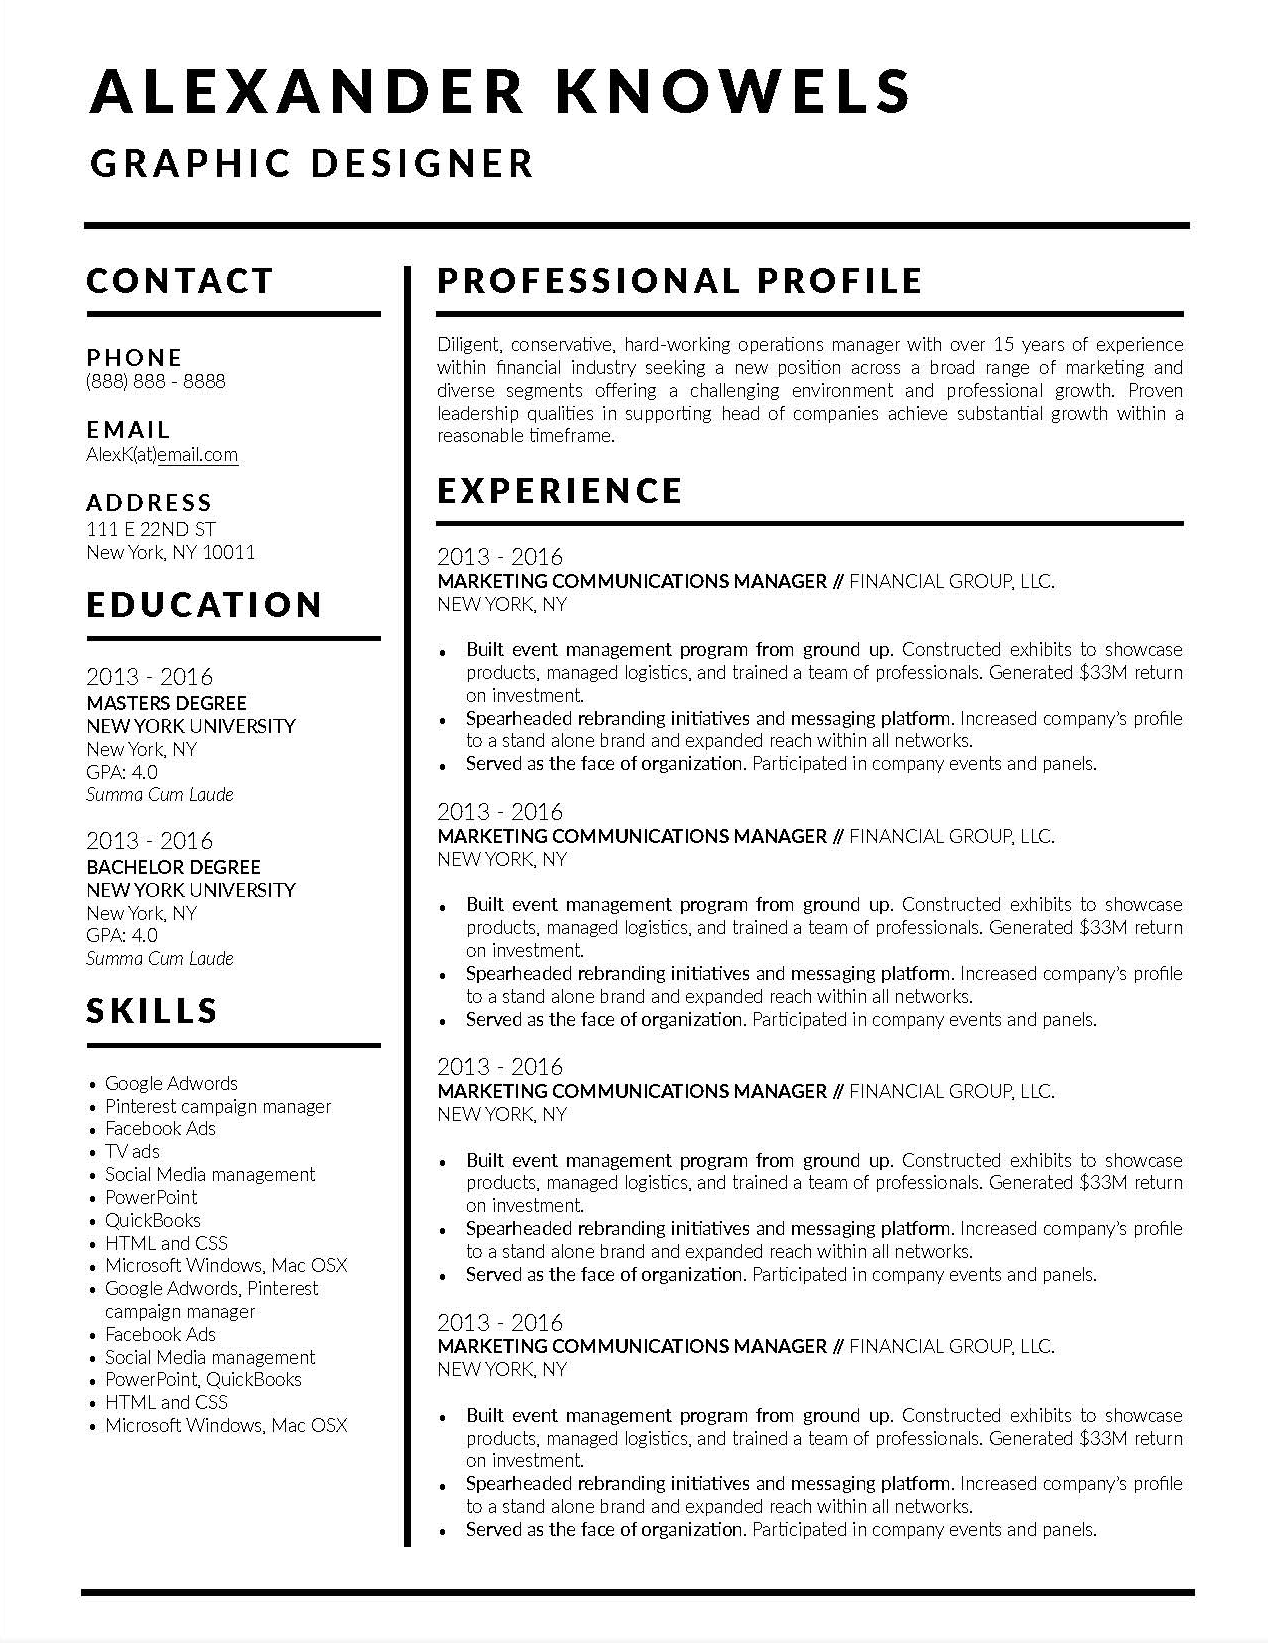 Downloadable Resume Template for Microsoft Word and Apple Pages